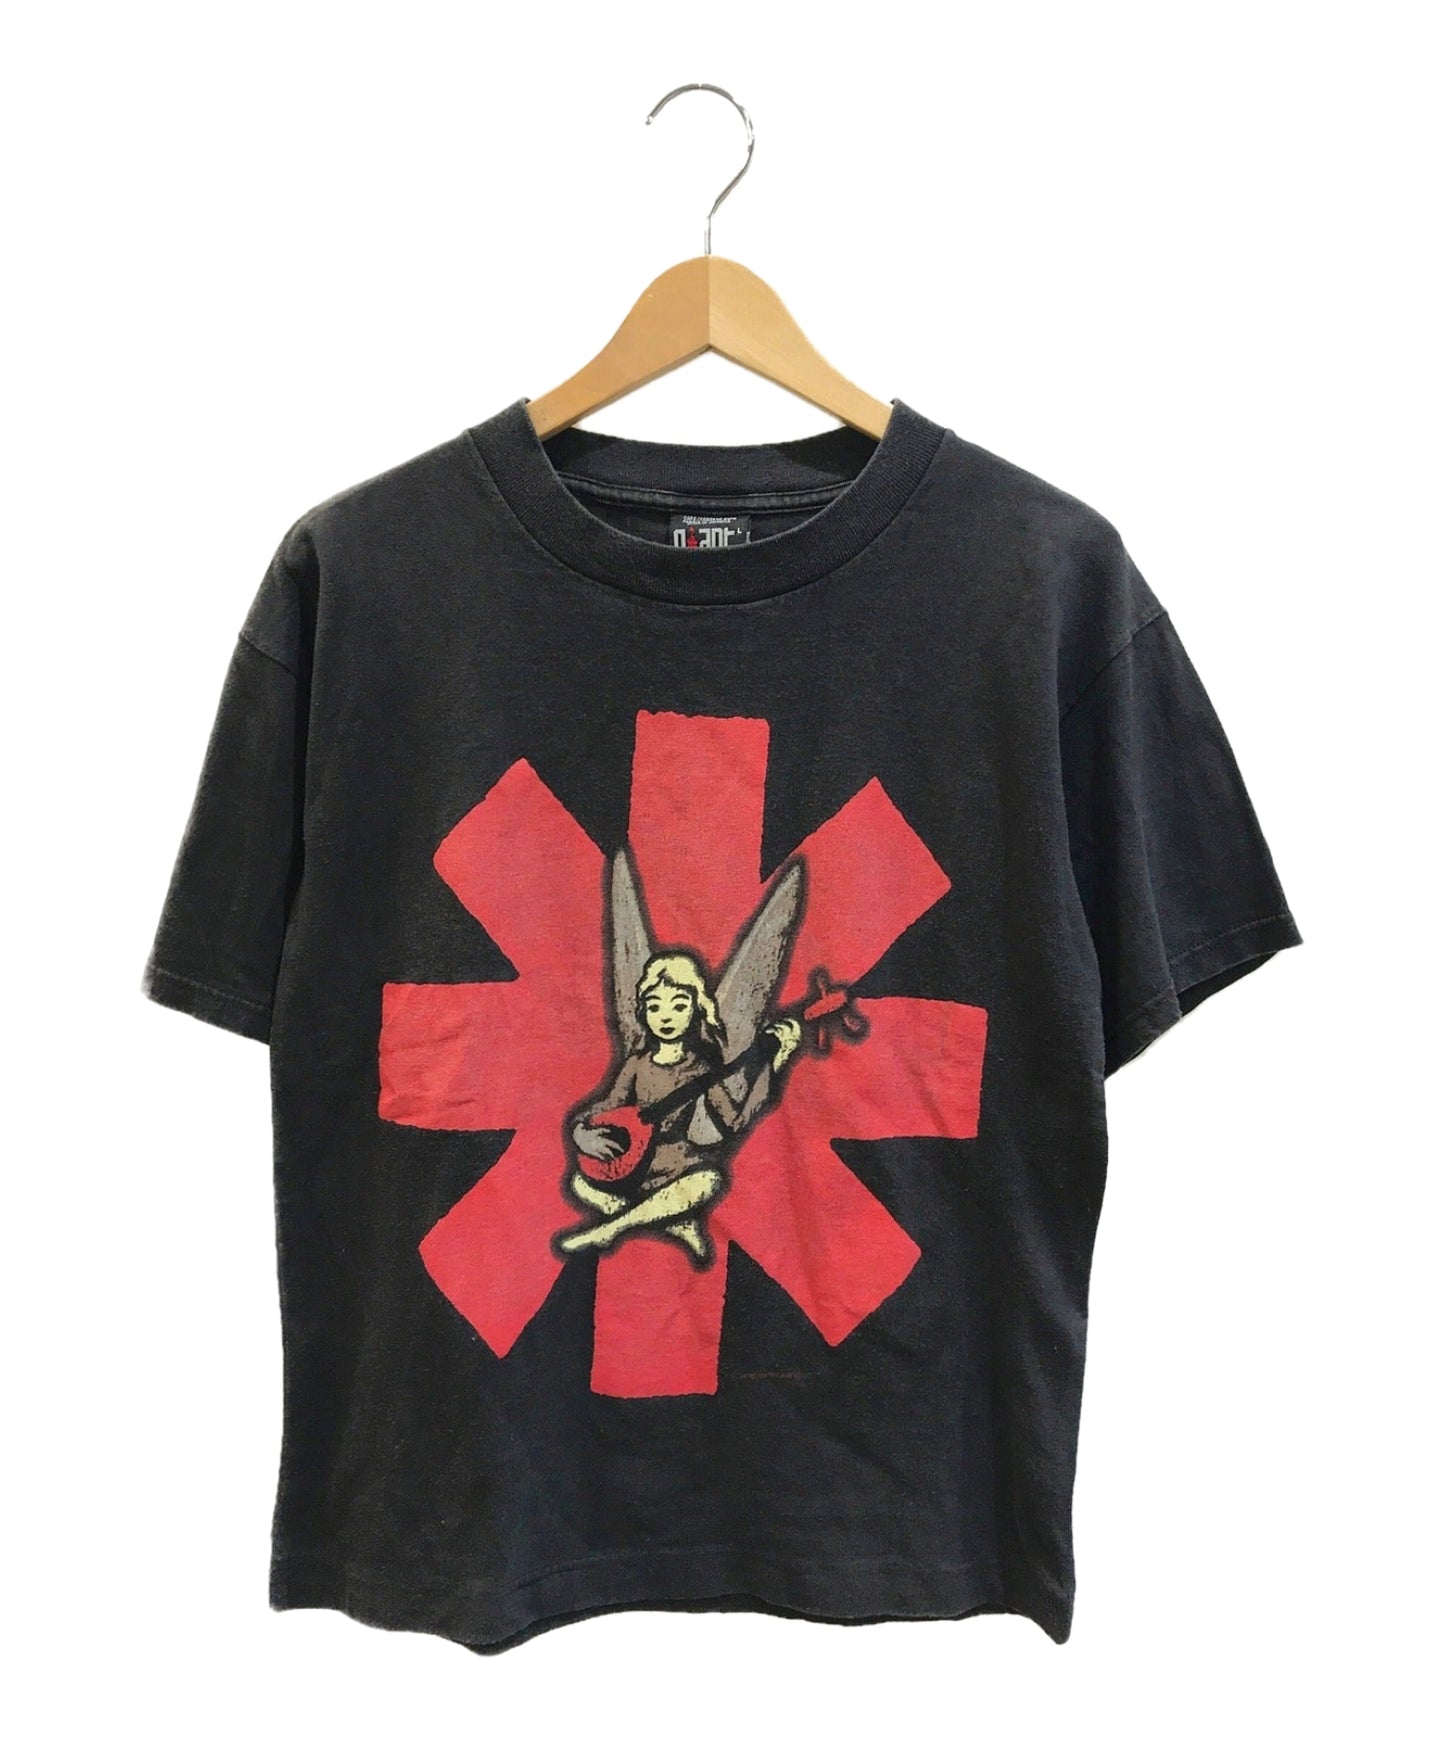 [Pre-owned] [Vintage Clothes] Red Hot Chili Peppers Band T-Shirt